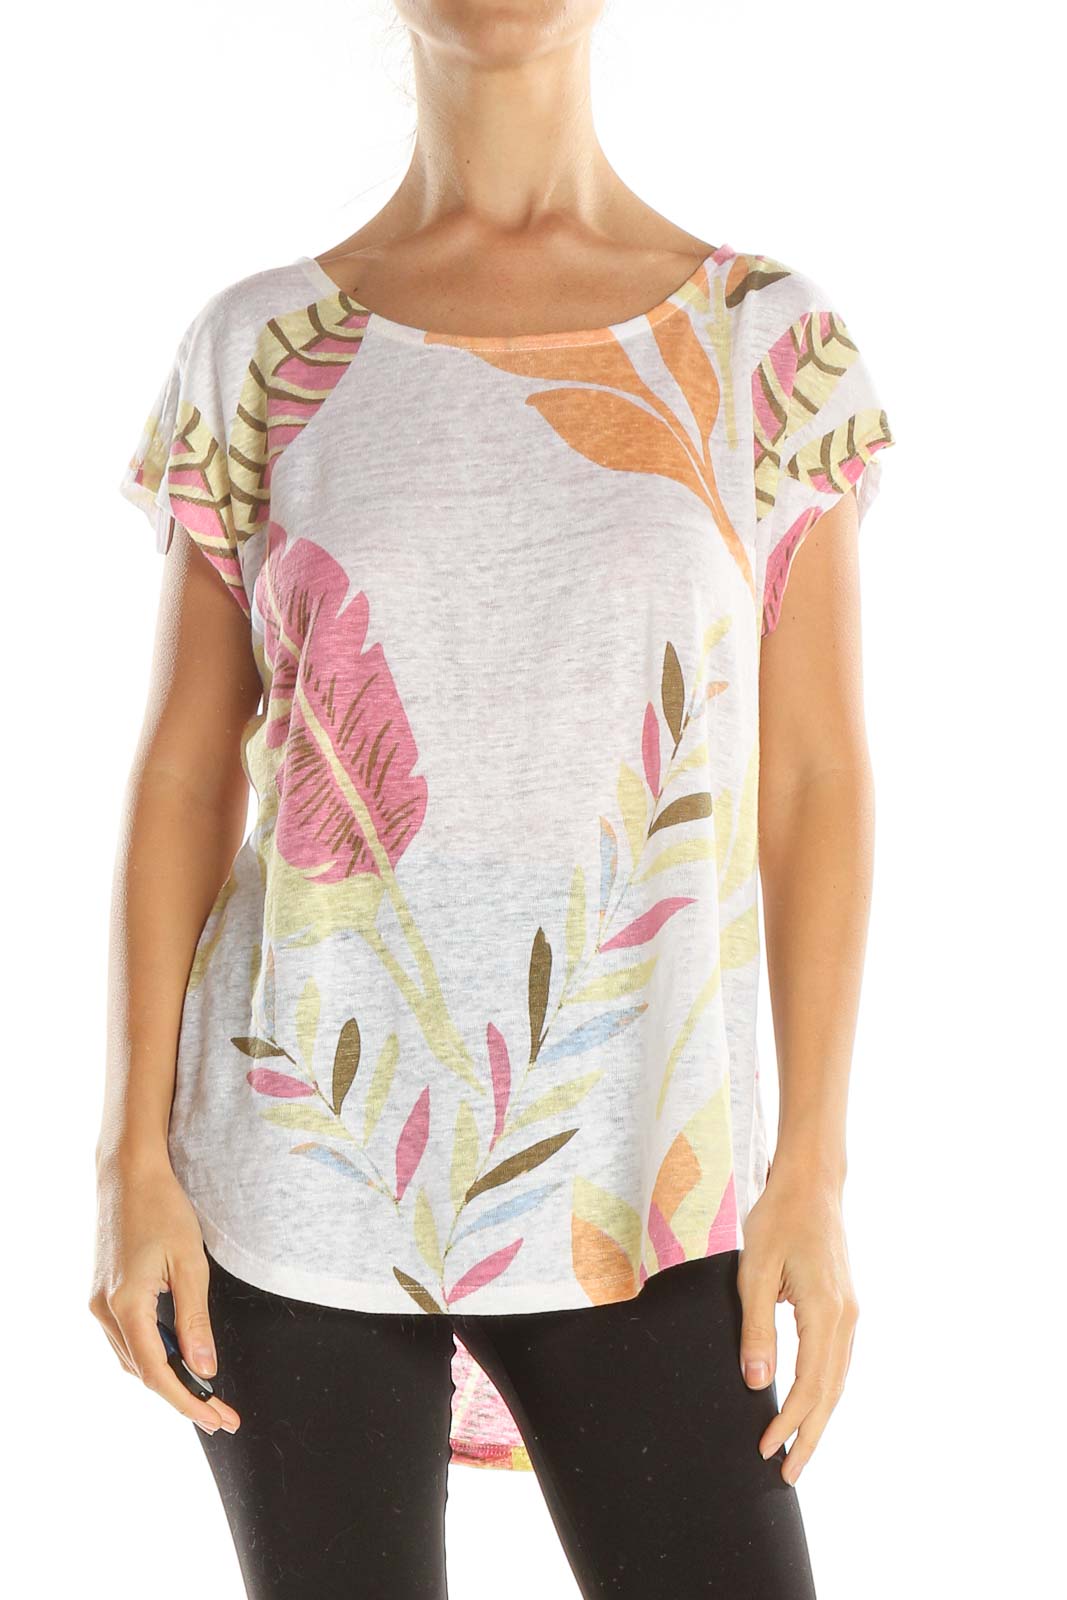 White Tropical Print Casual T-Shirt Front